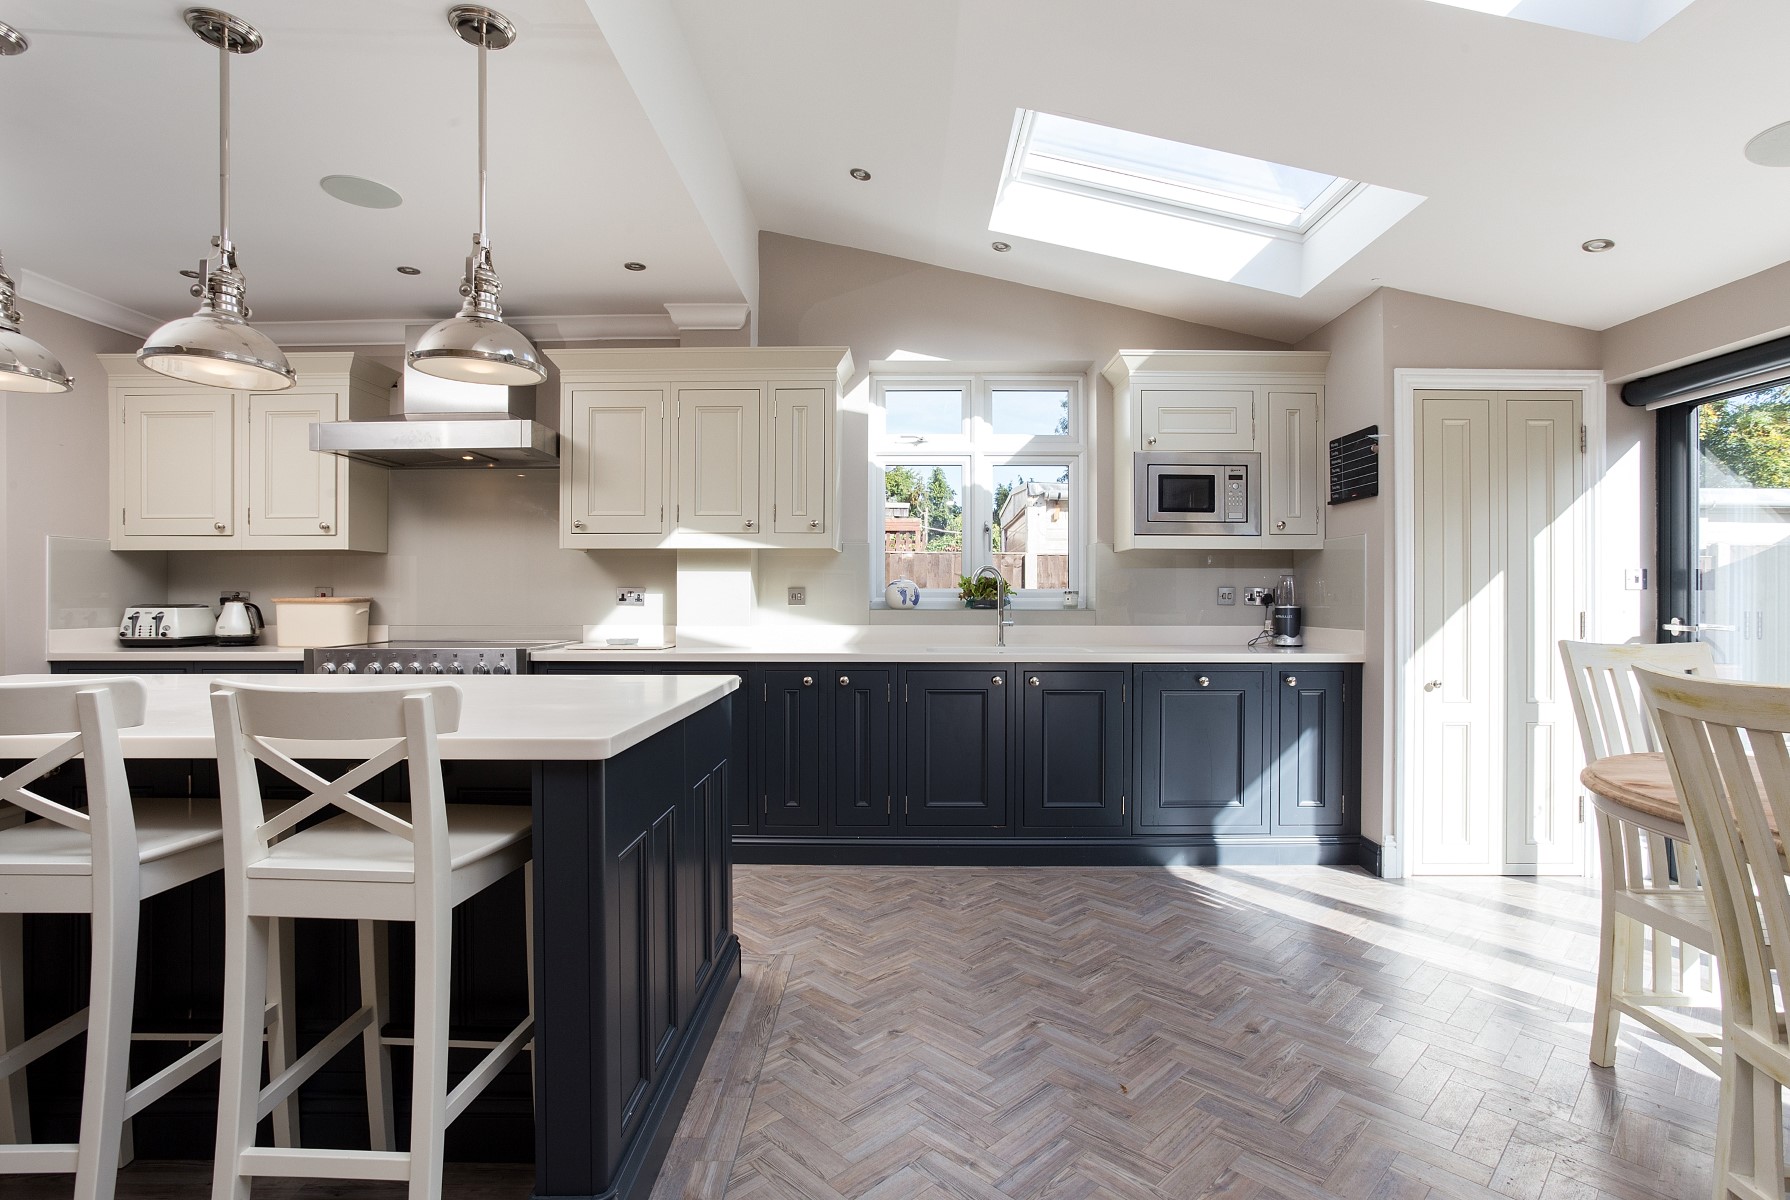 C&C kitchens Hertfordshire - Half Pencil & Scalloped in Charcoal & Almond